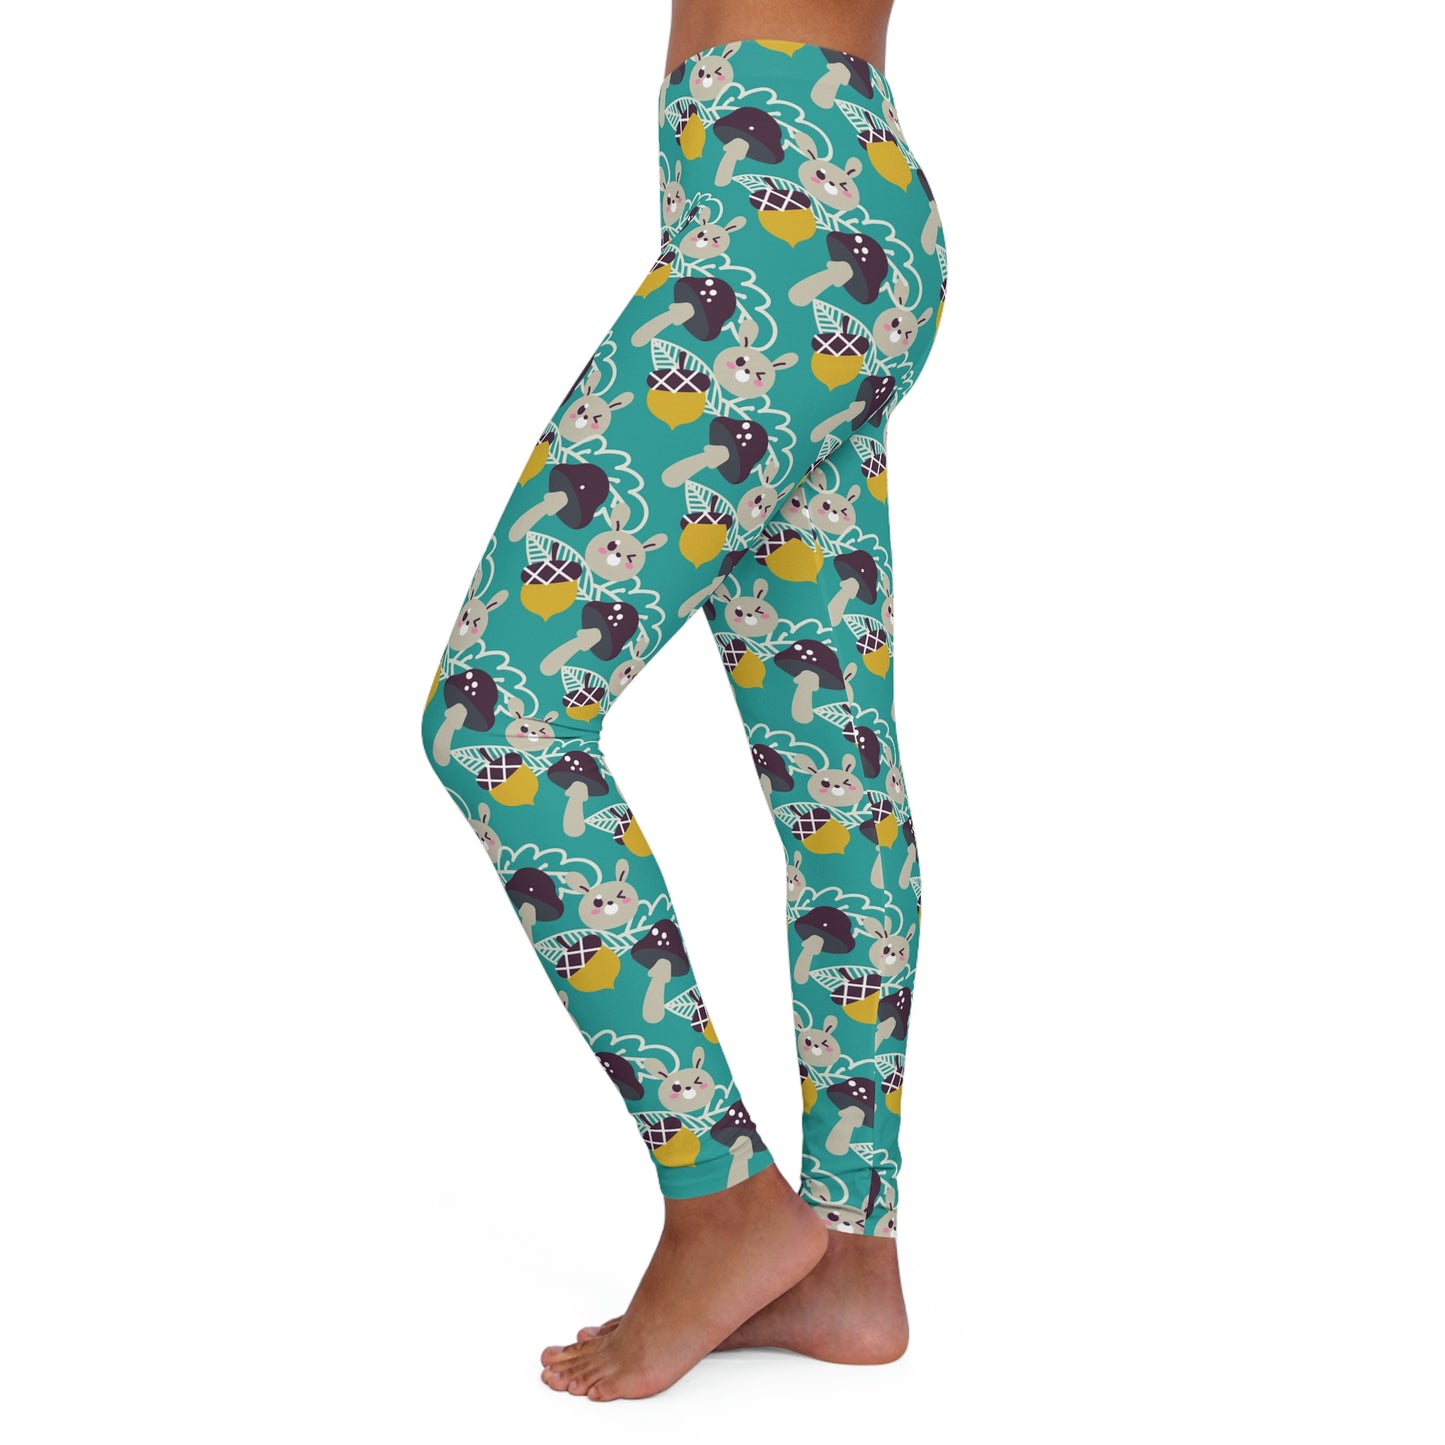 Magic Mushrooms cottagecore, Psychedelic Women Leggings, One of a Kind - Unique Workout Activewear tights ,Mothers Day, Wife Christmas Gift